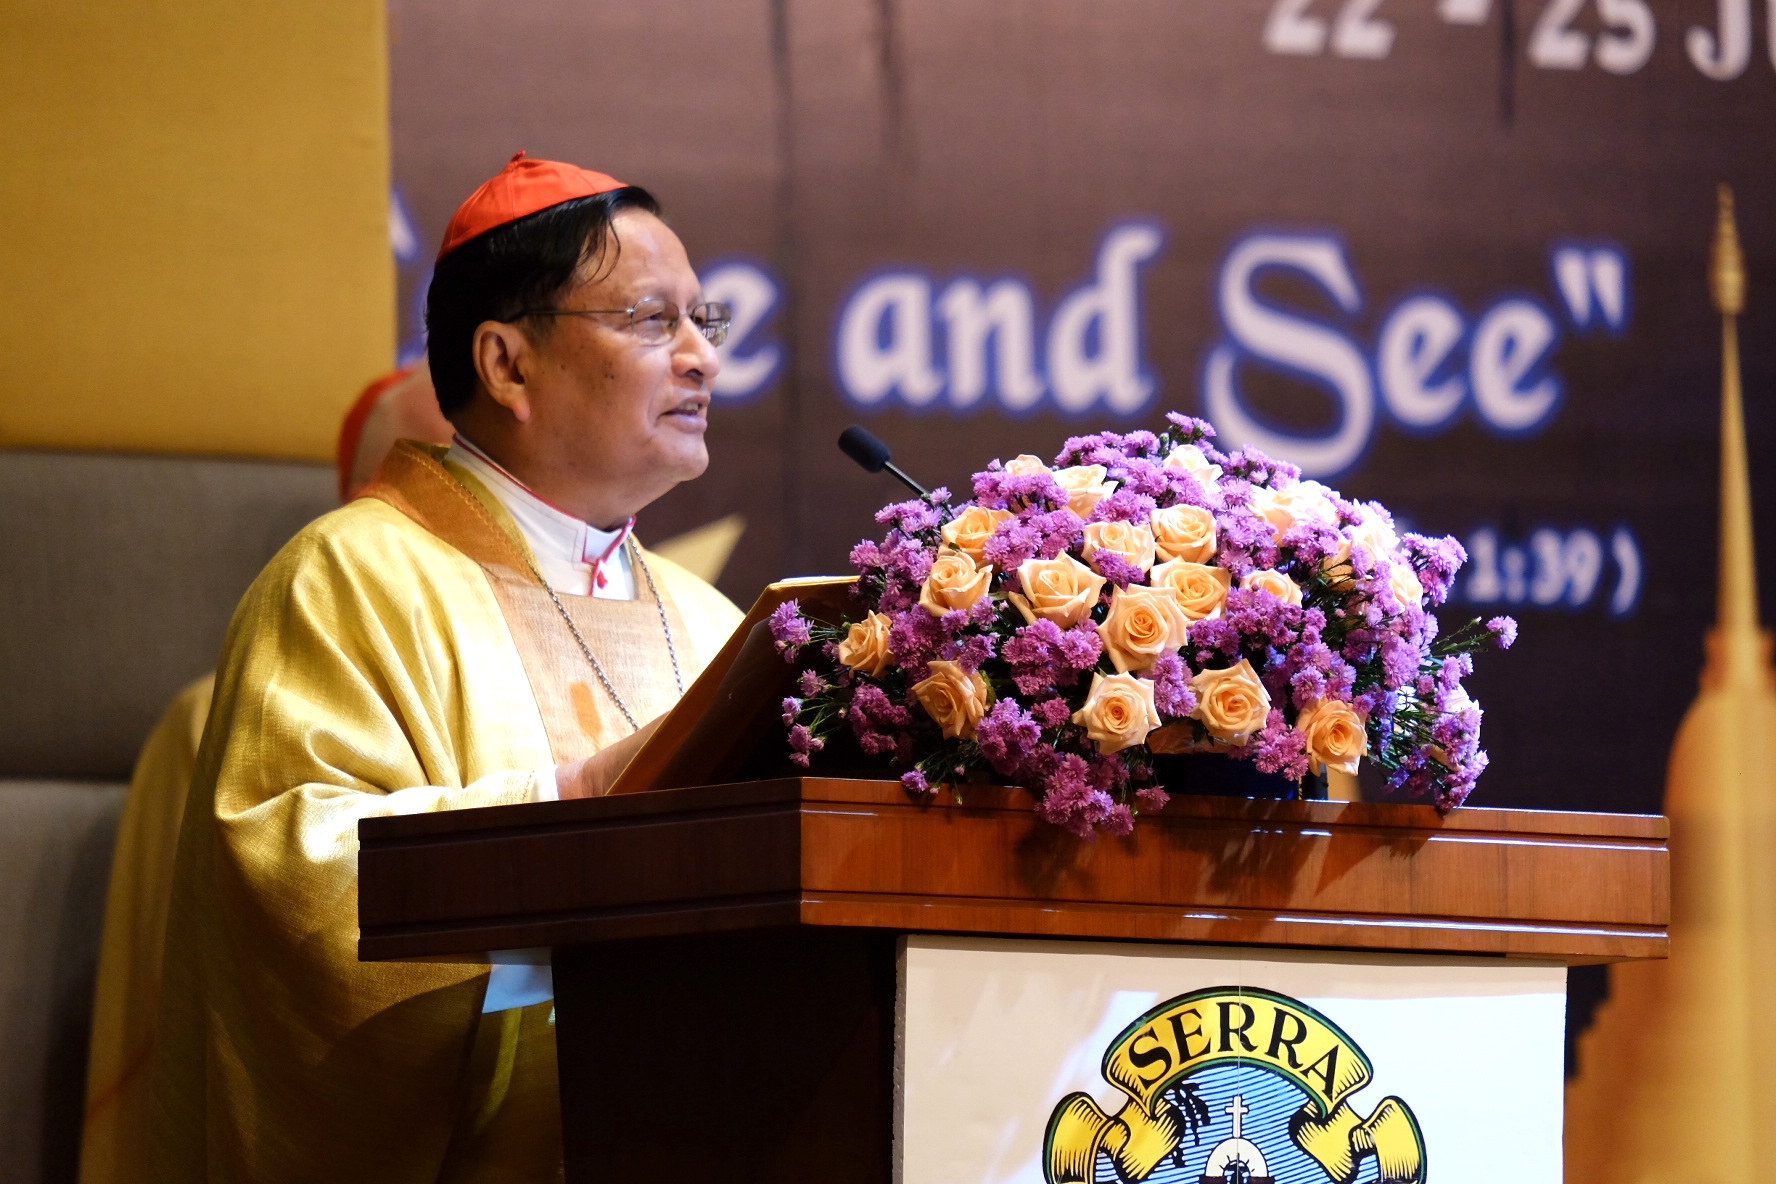 Cardinal Charles Maung Bo, President of the Federation of Asian Bishops' Conferences (FABC) presides over the opening Mass at SERRA 80th International Convention, Chiang Mai, Thailand